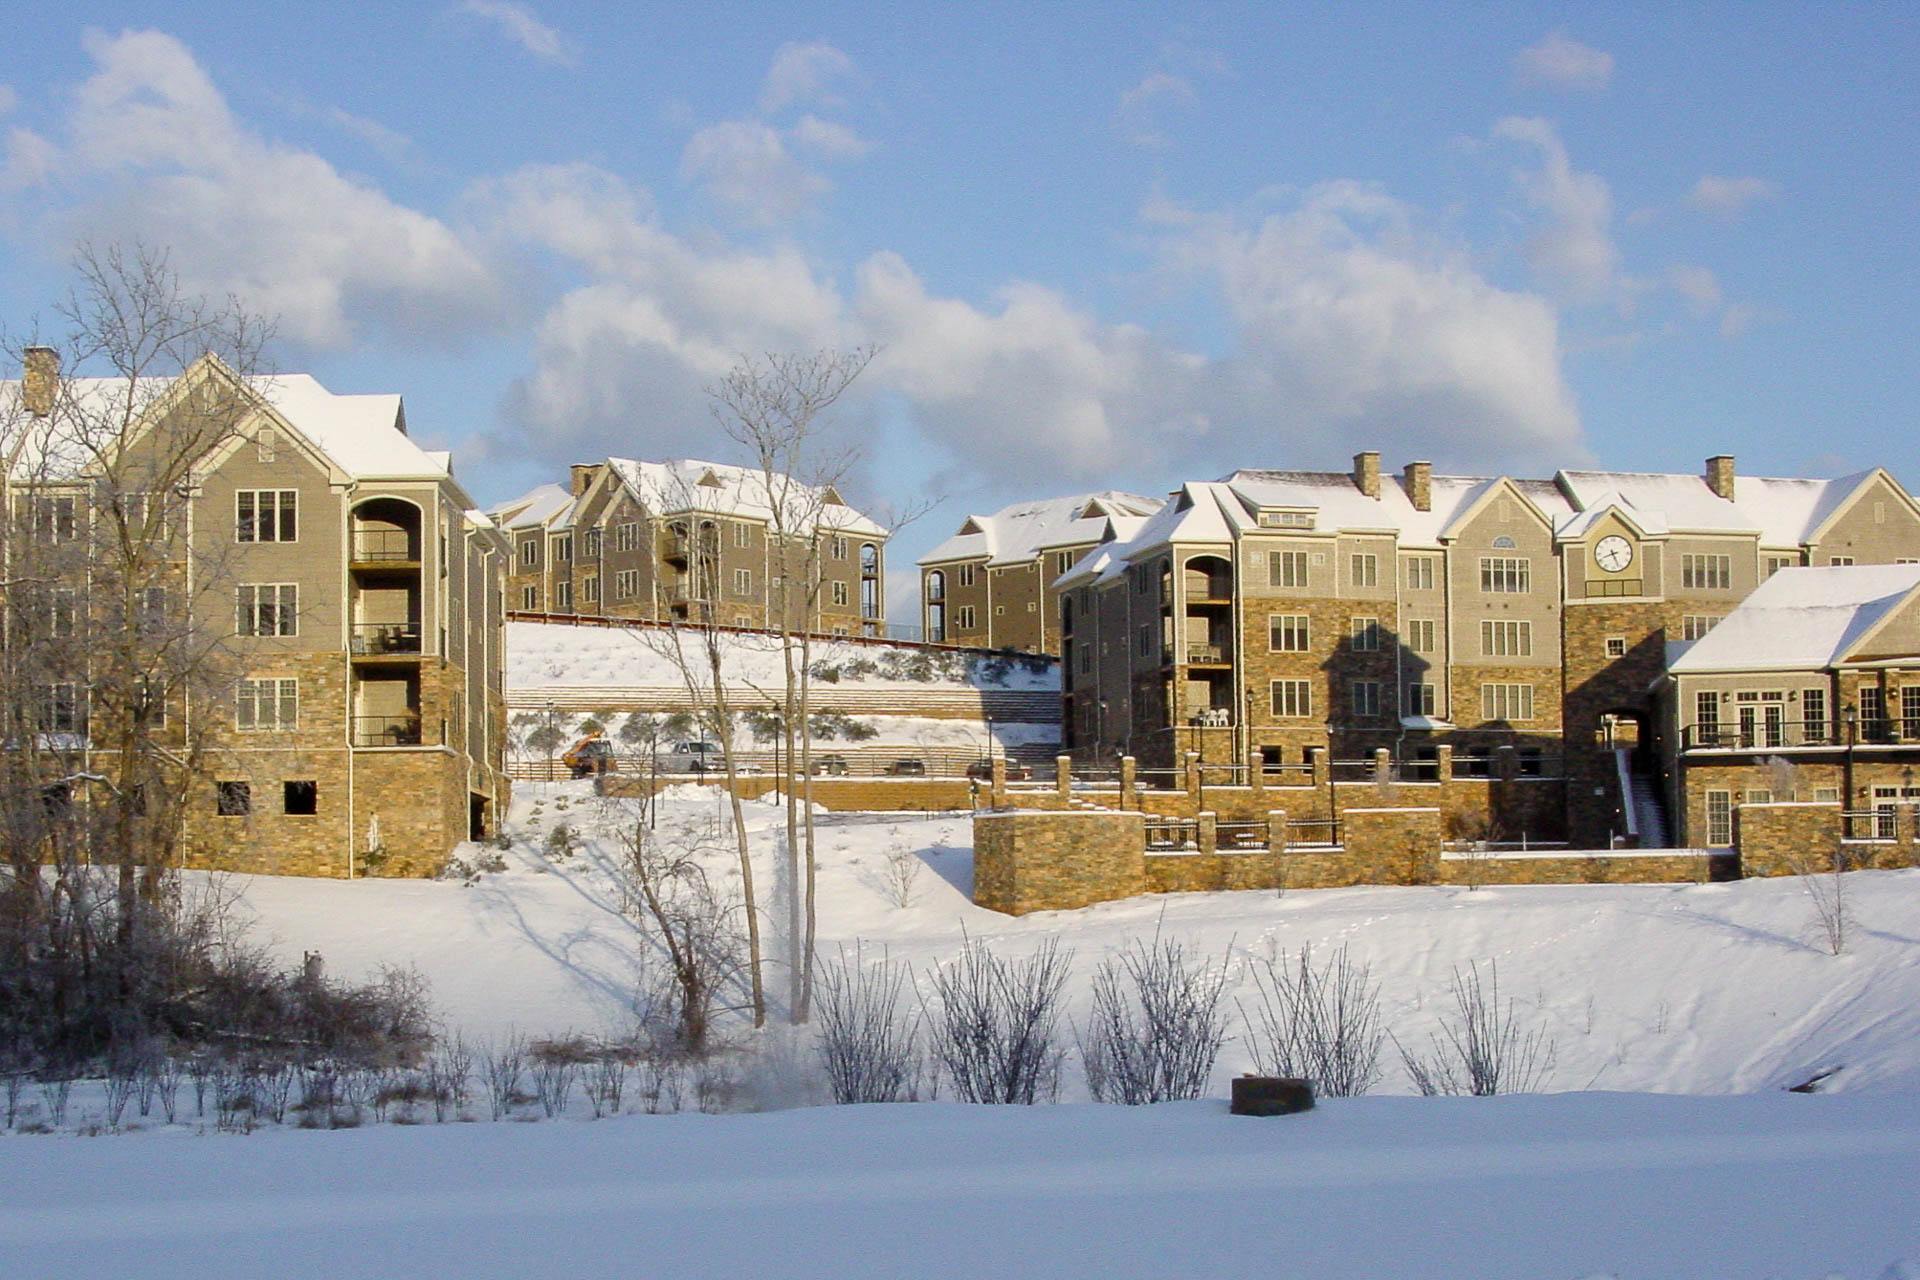 Stone Creek Village Apartments exterior in the snow